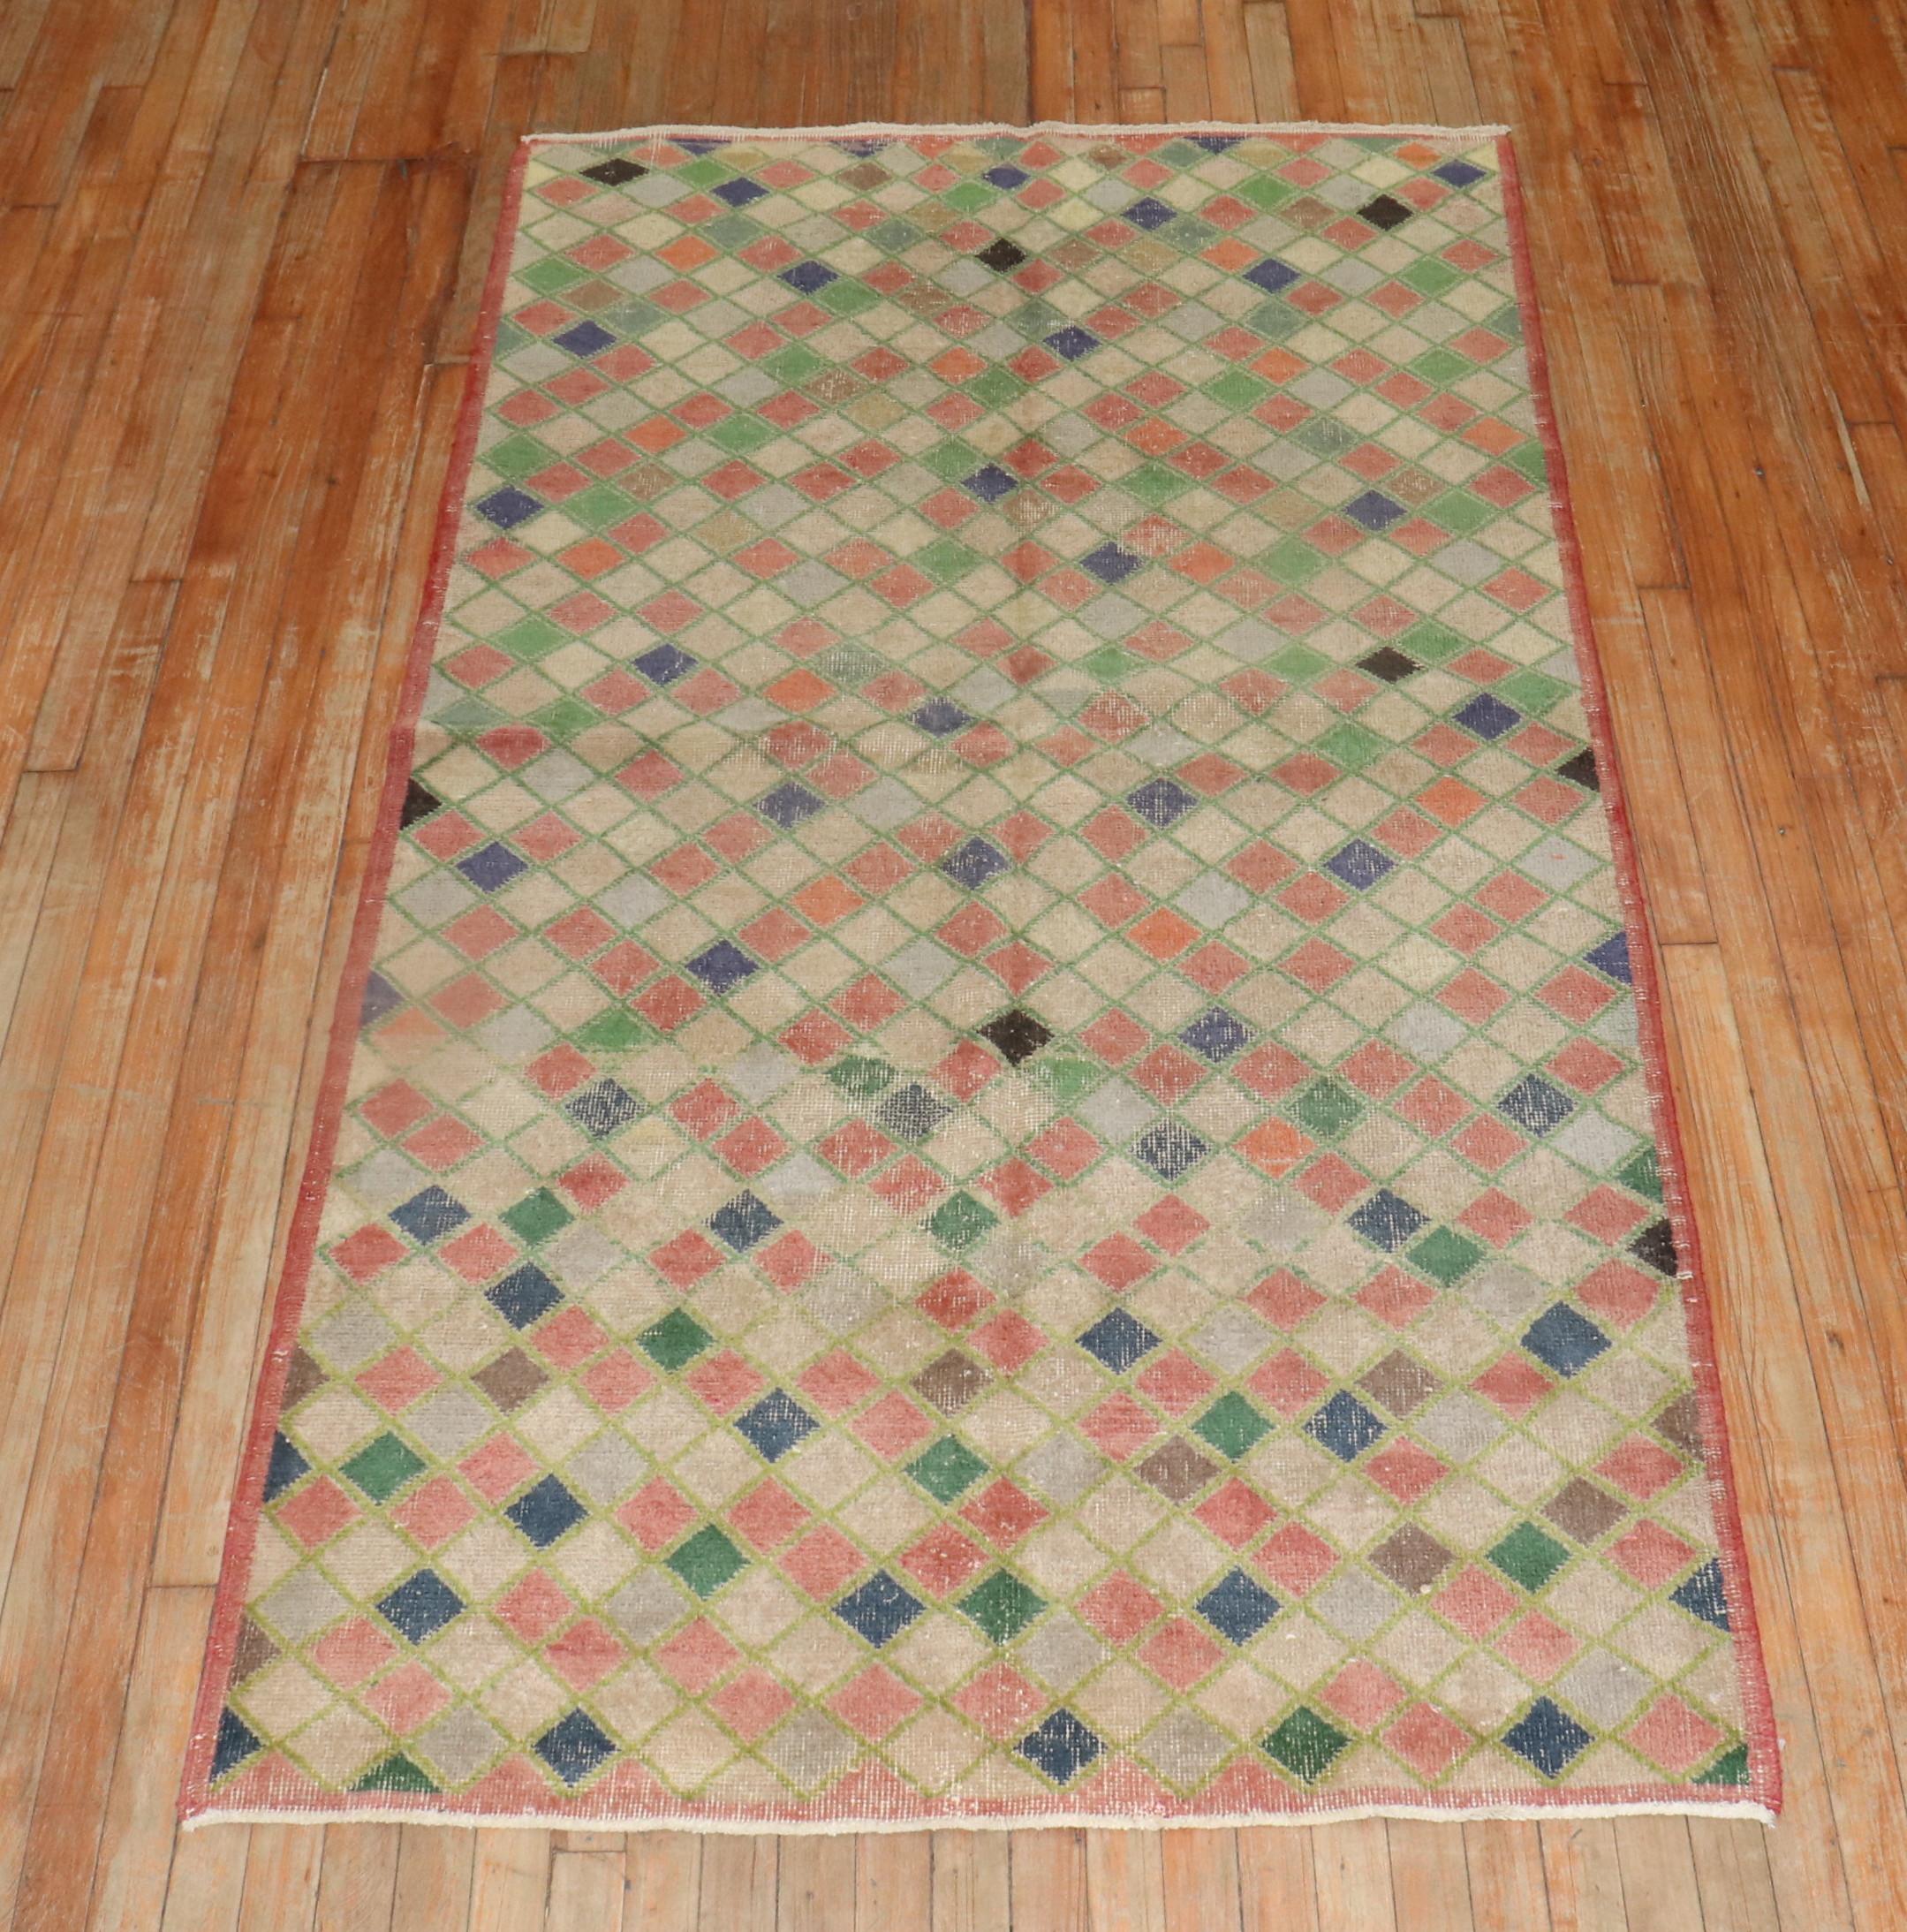 A decorative handmade midcentury Turkish Anatolian rug with an all-over repetitive diamond design

Measures: 4' x 7'3